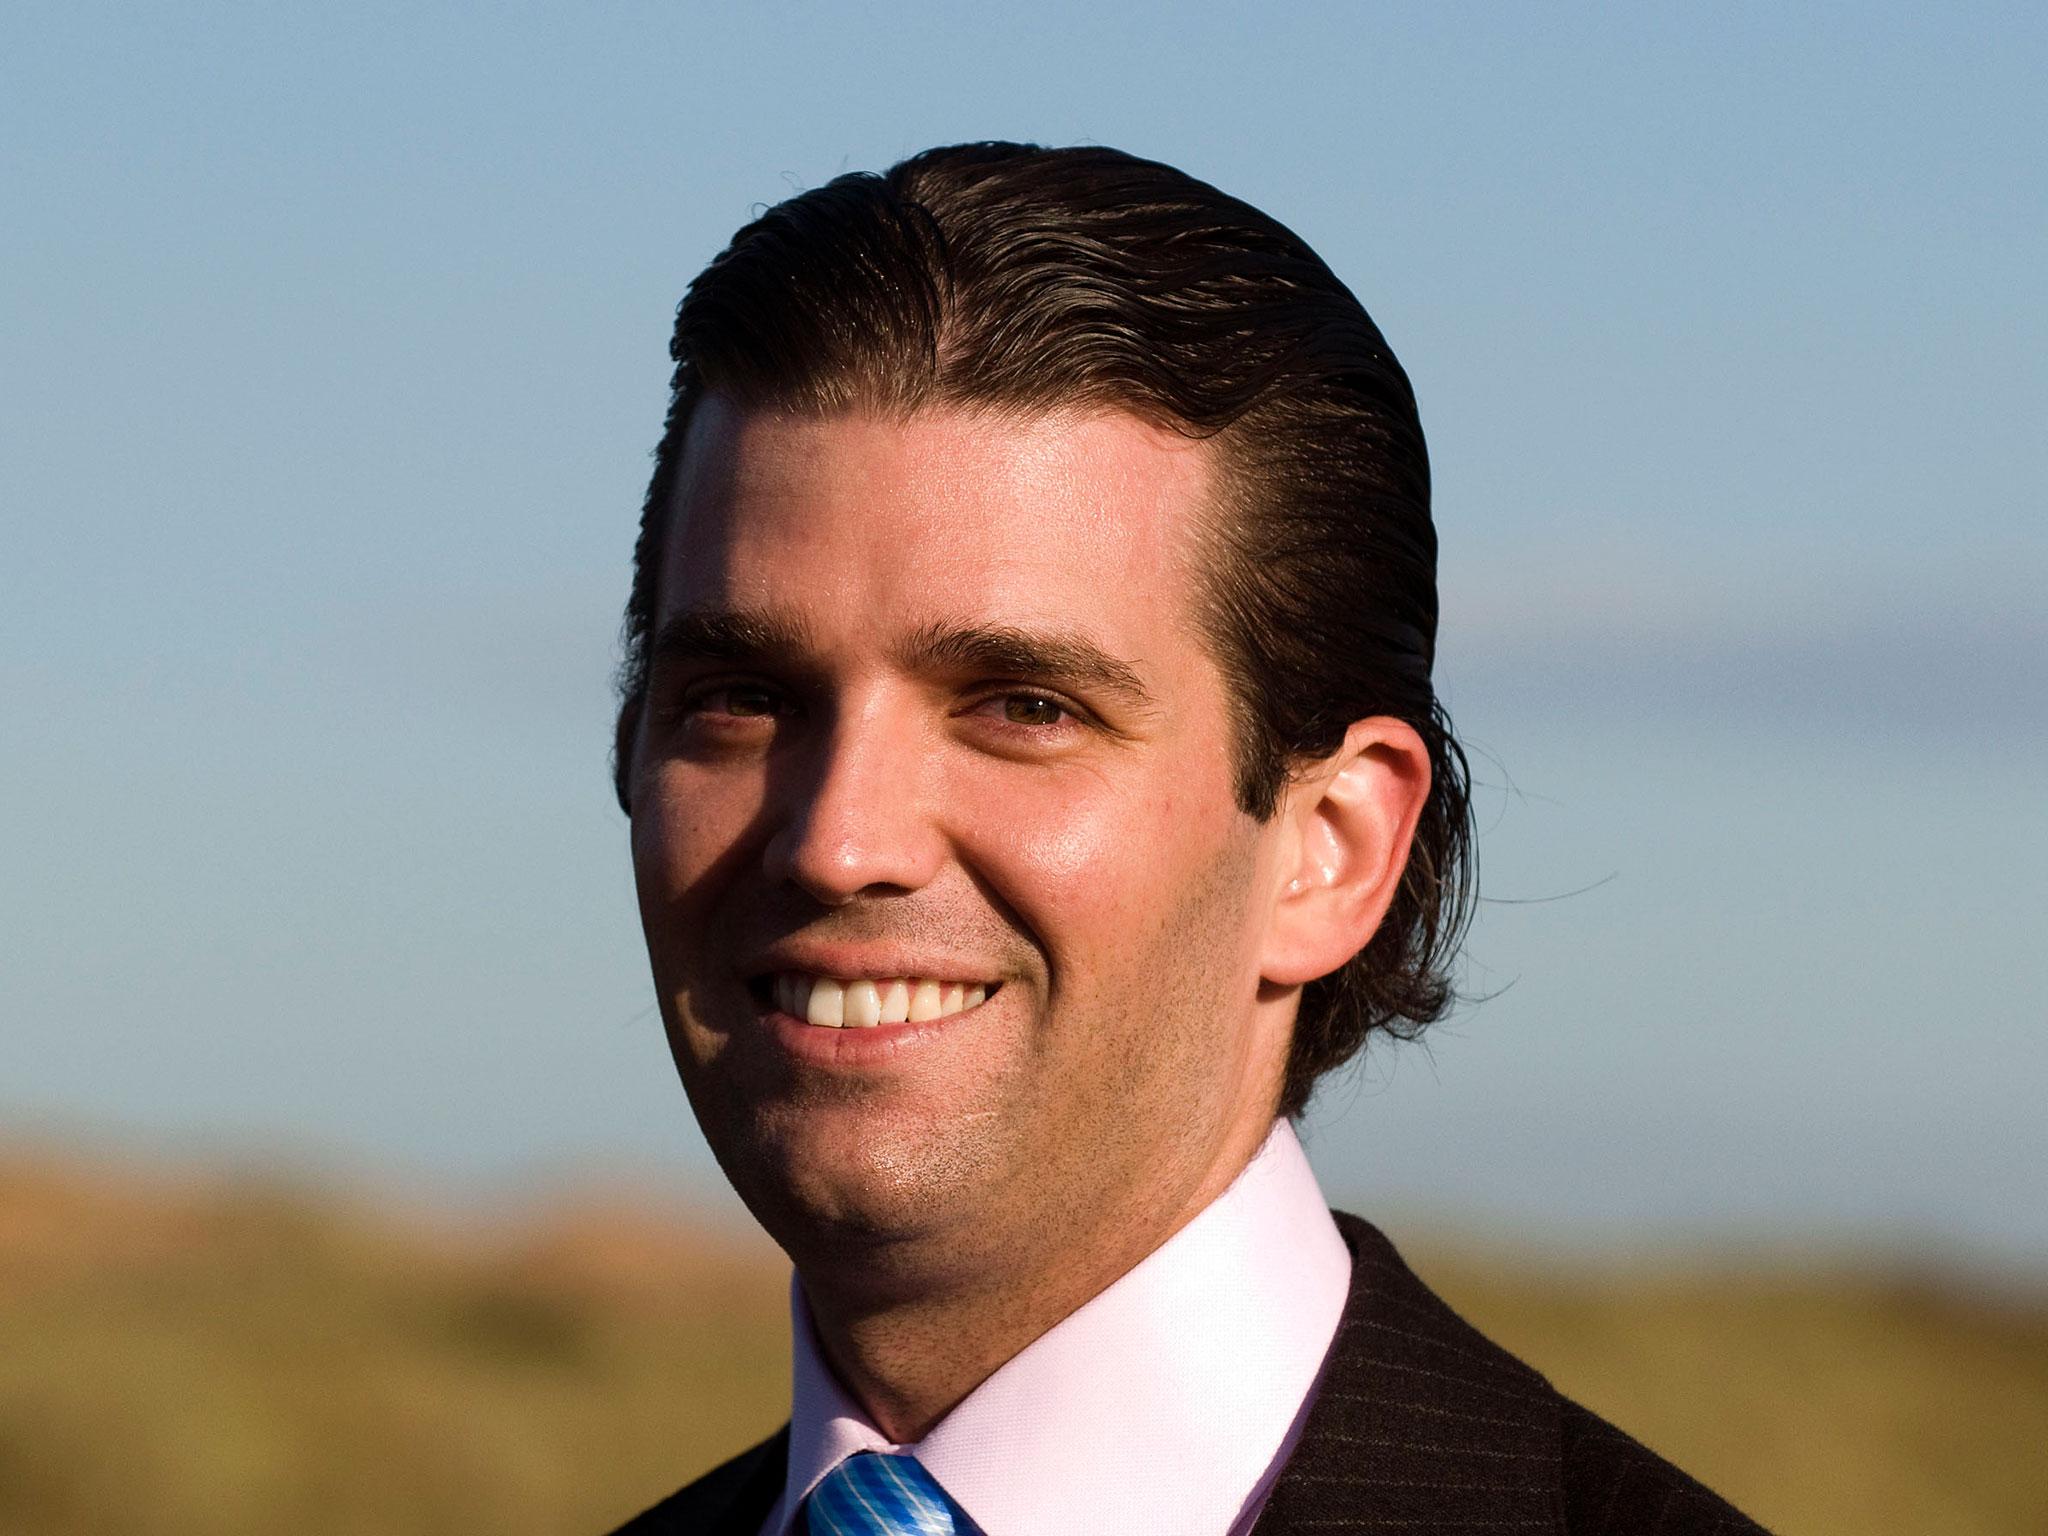 Donald Trump Junior would spend time with Michael Jackson in Trump Tower